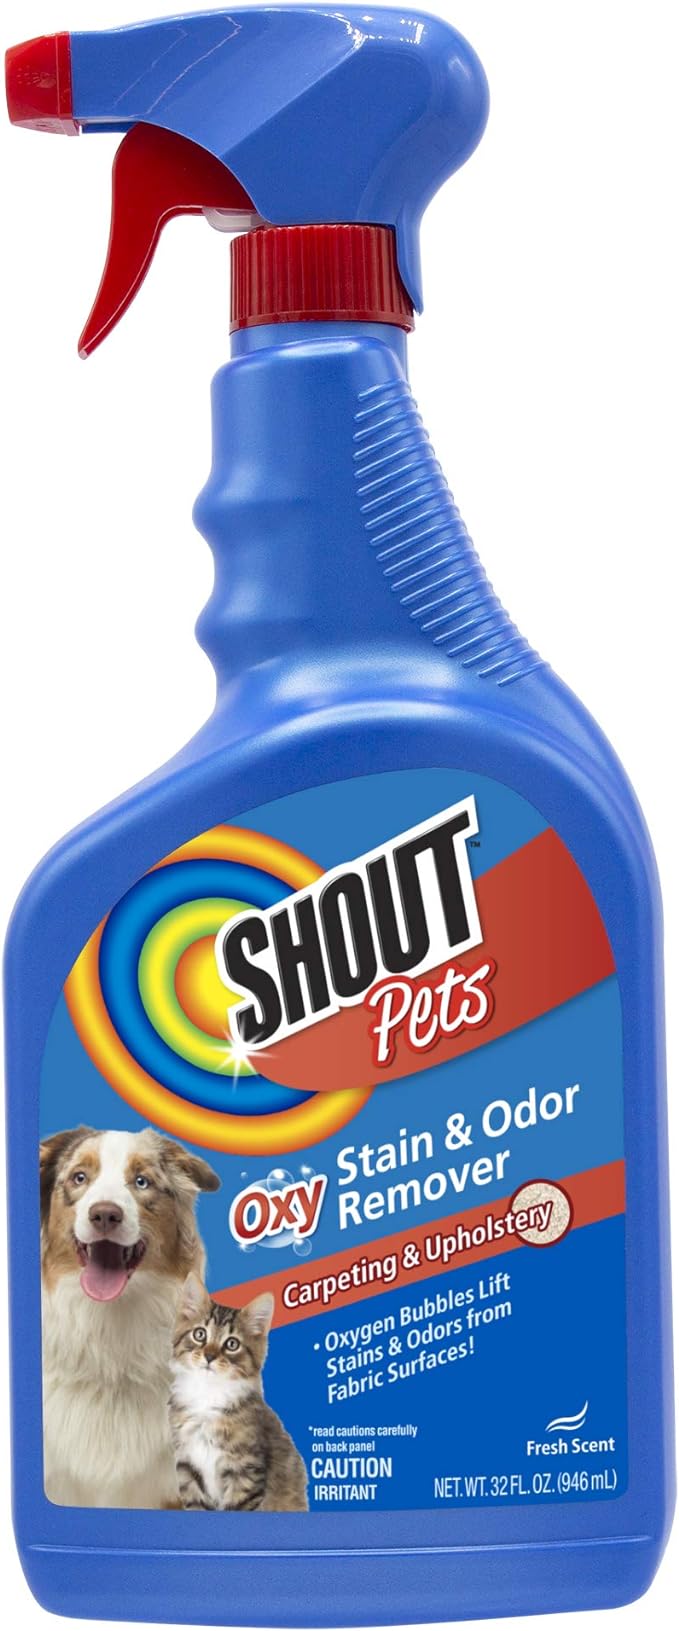 When tackling pesky pet stains, you'll find Shout Pet Stain Remover an indispensable ally